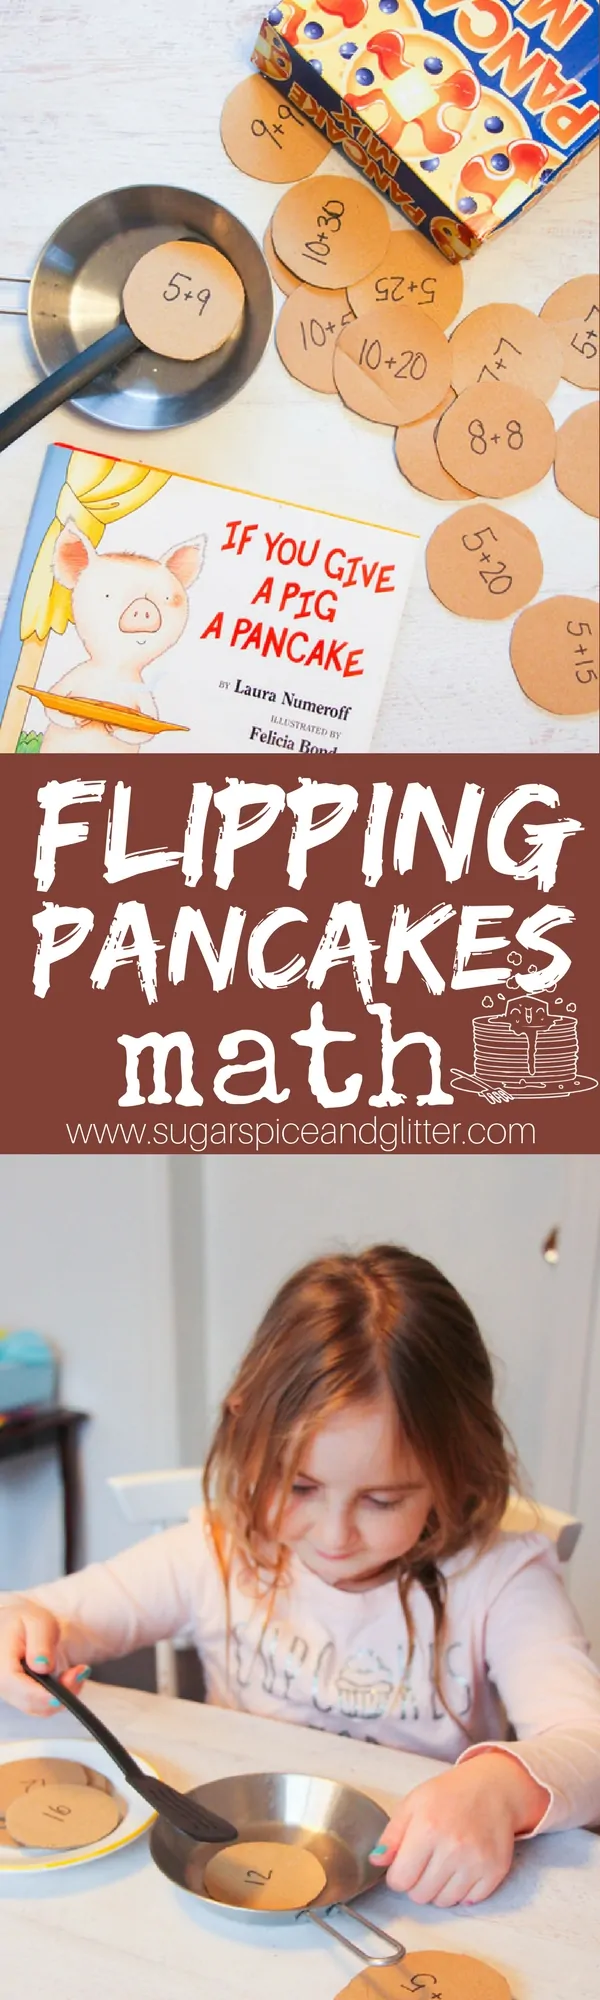 If You Give a Pig a Pancake inspired math activity - Flipping Pancakes math! A hands on math activity with quick DIY play food